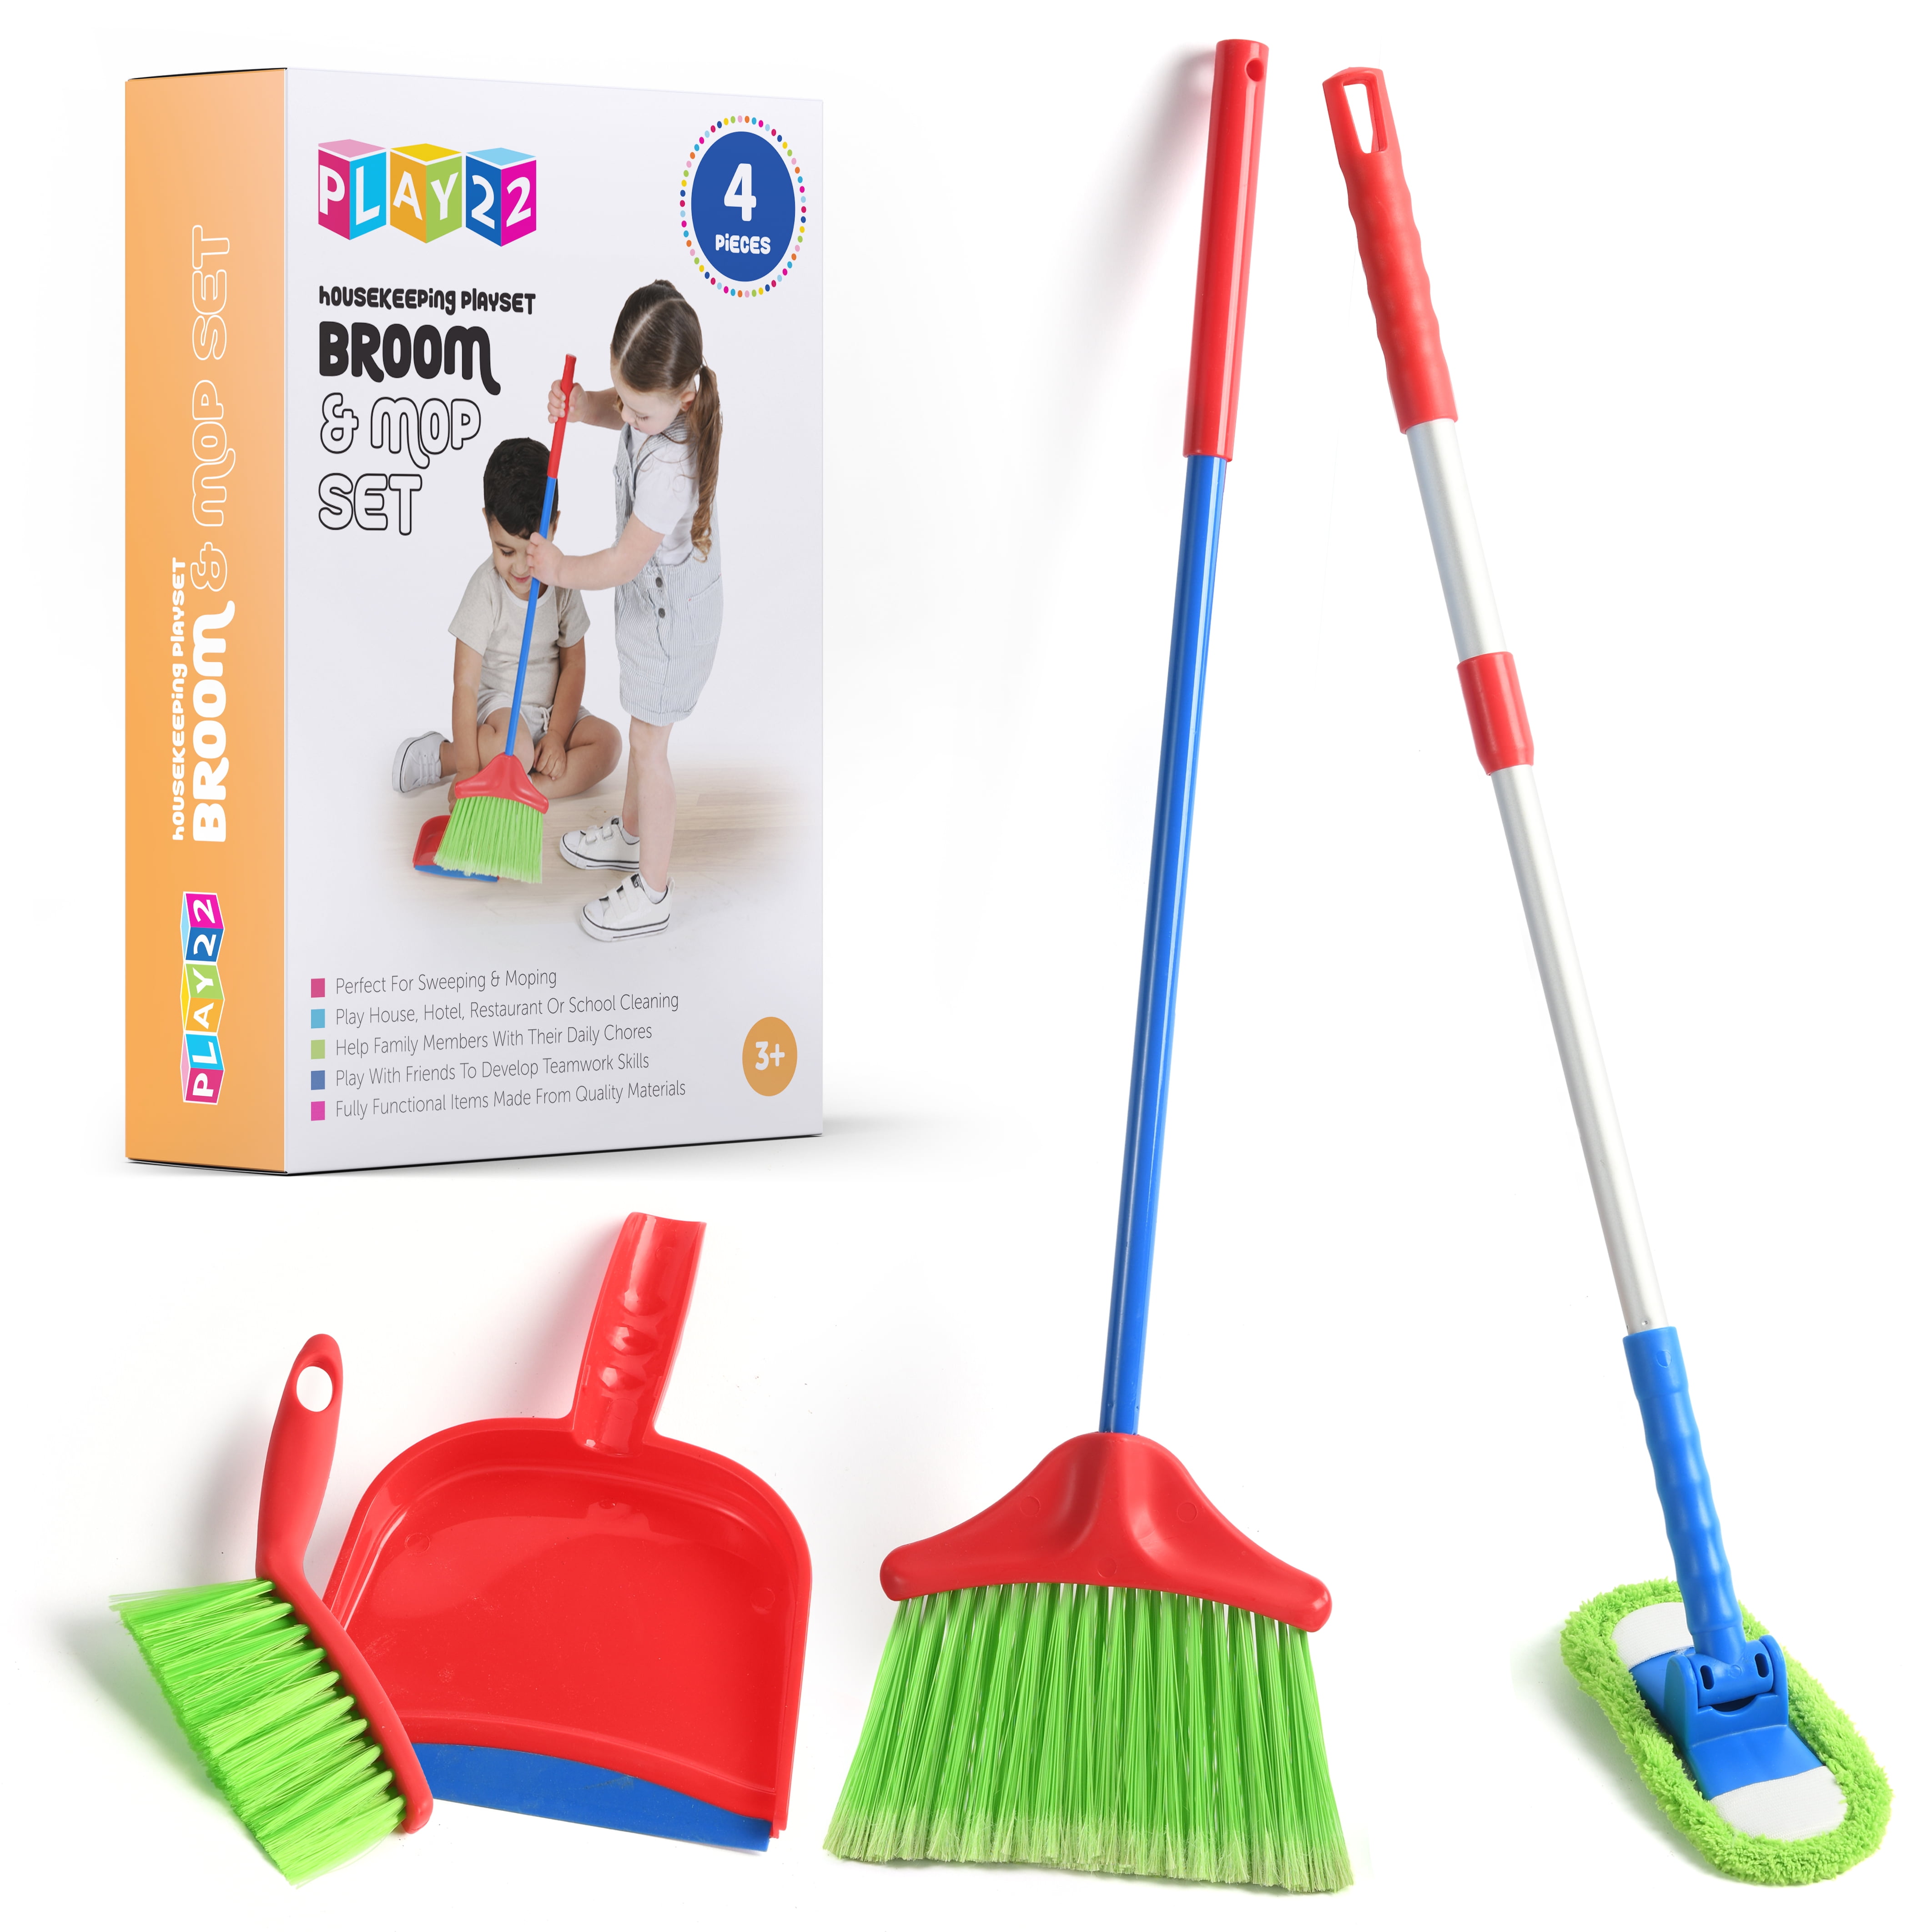 10x Kids Household Cleaning Set Pretended Broom Dustpan Brush Toy Play Game Fun. 